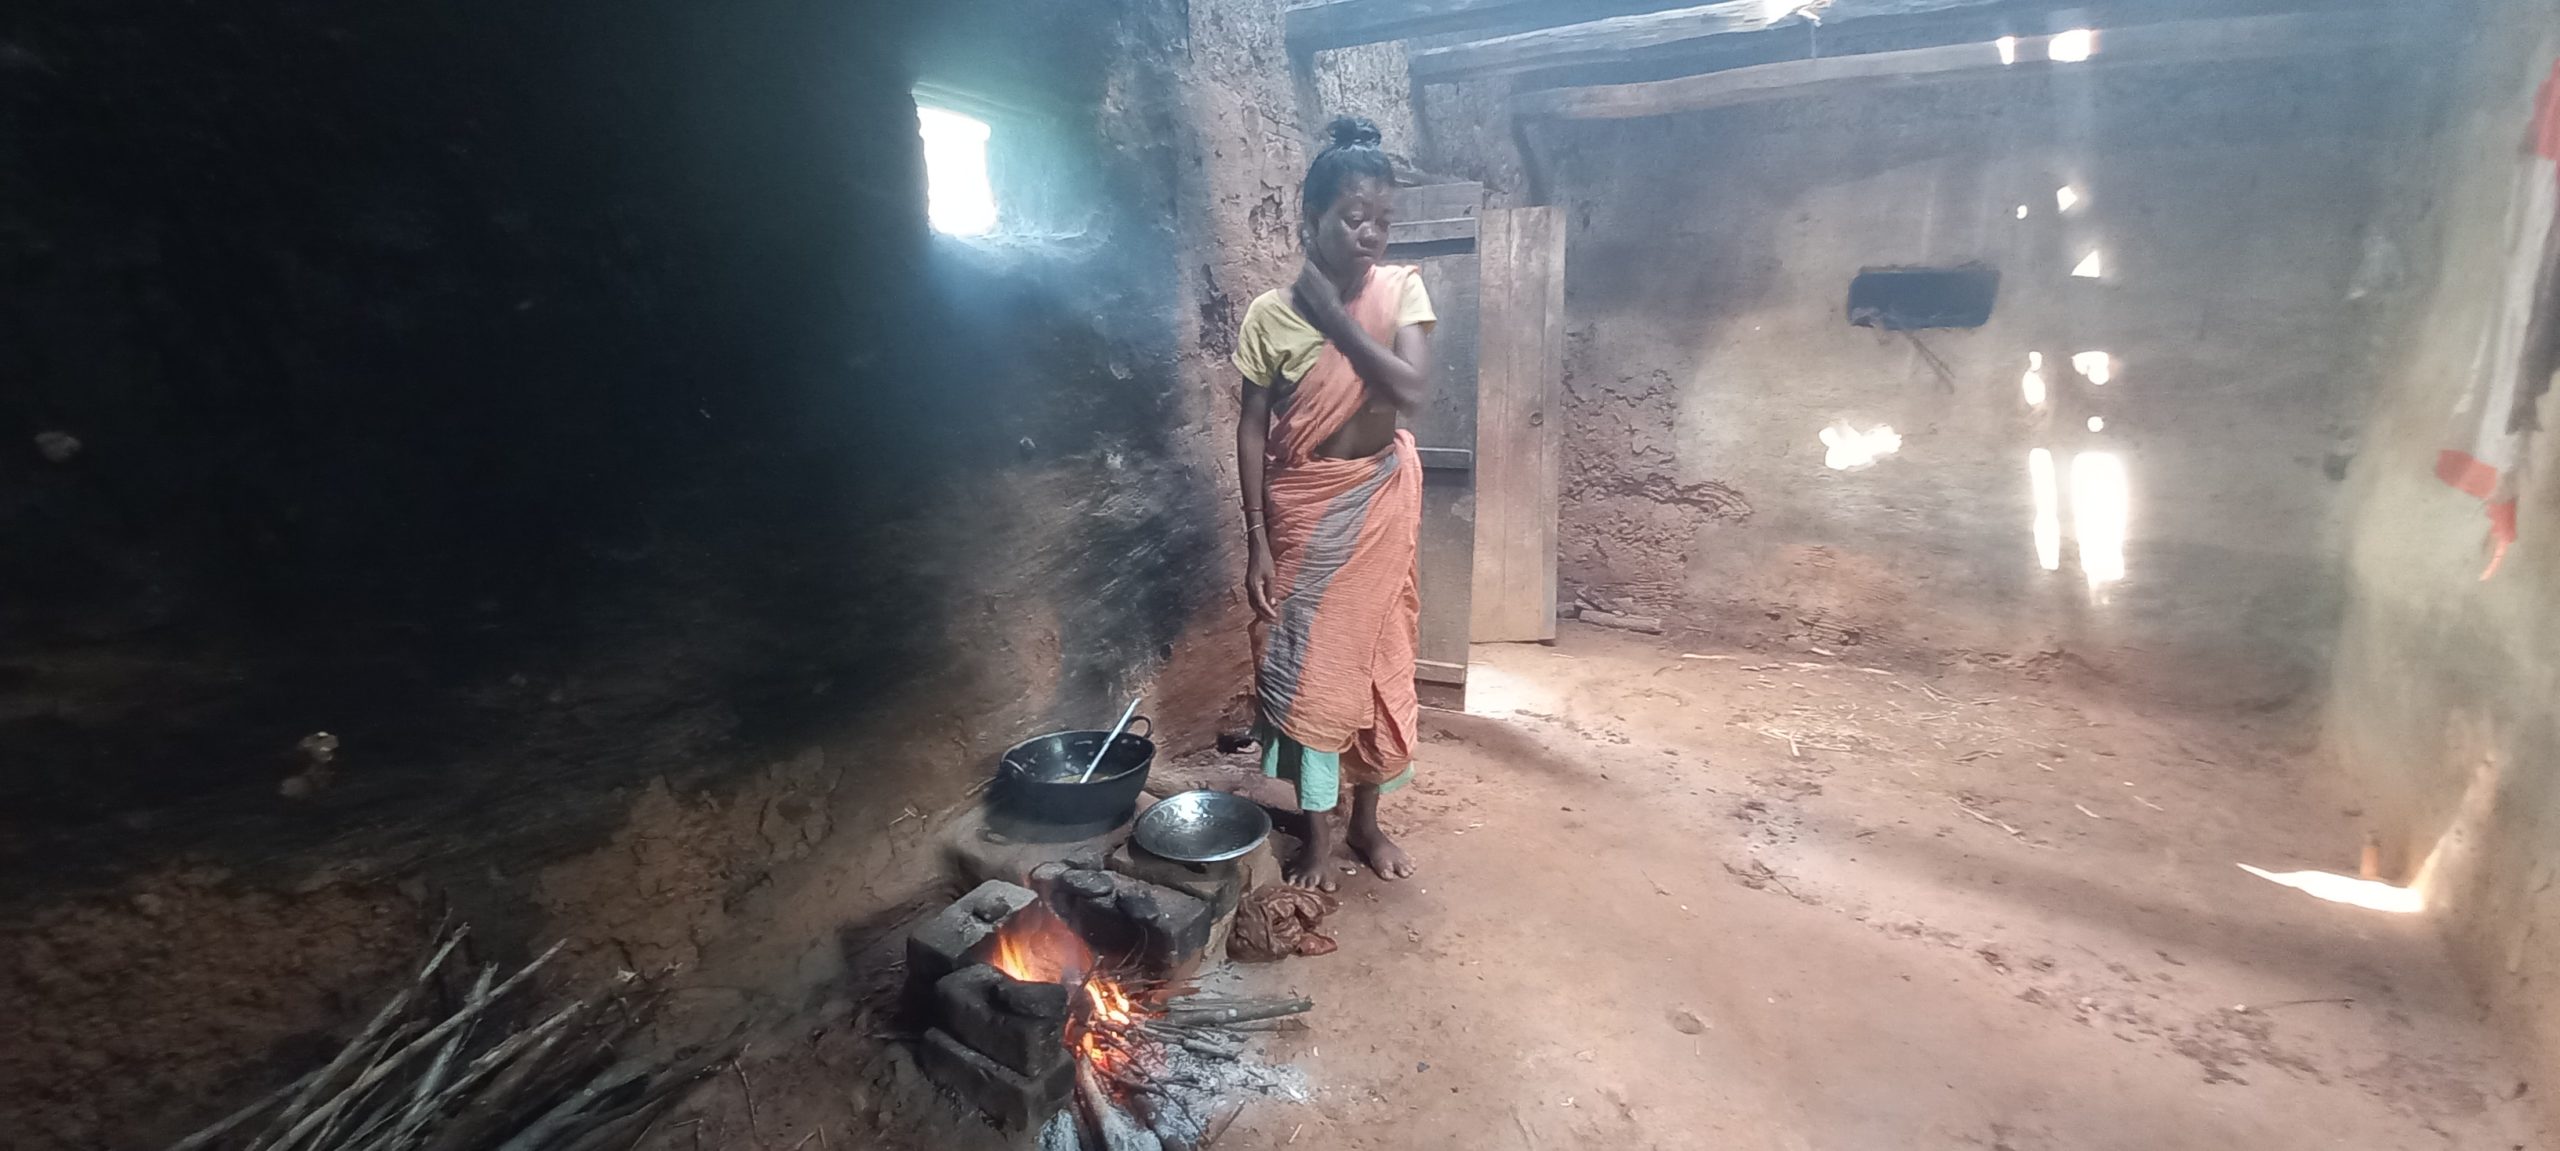 A woman stands in her kitchen next to food cooking over a fire